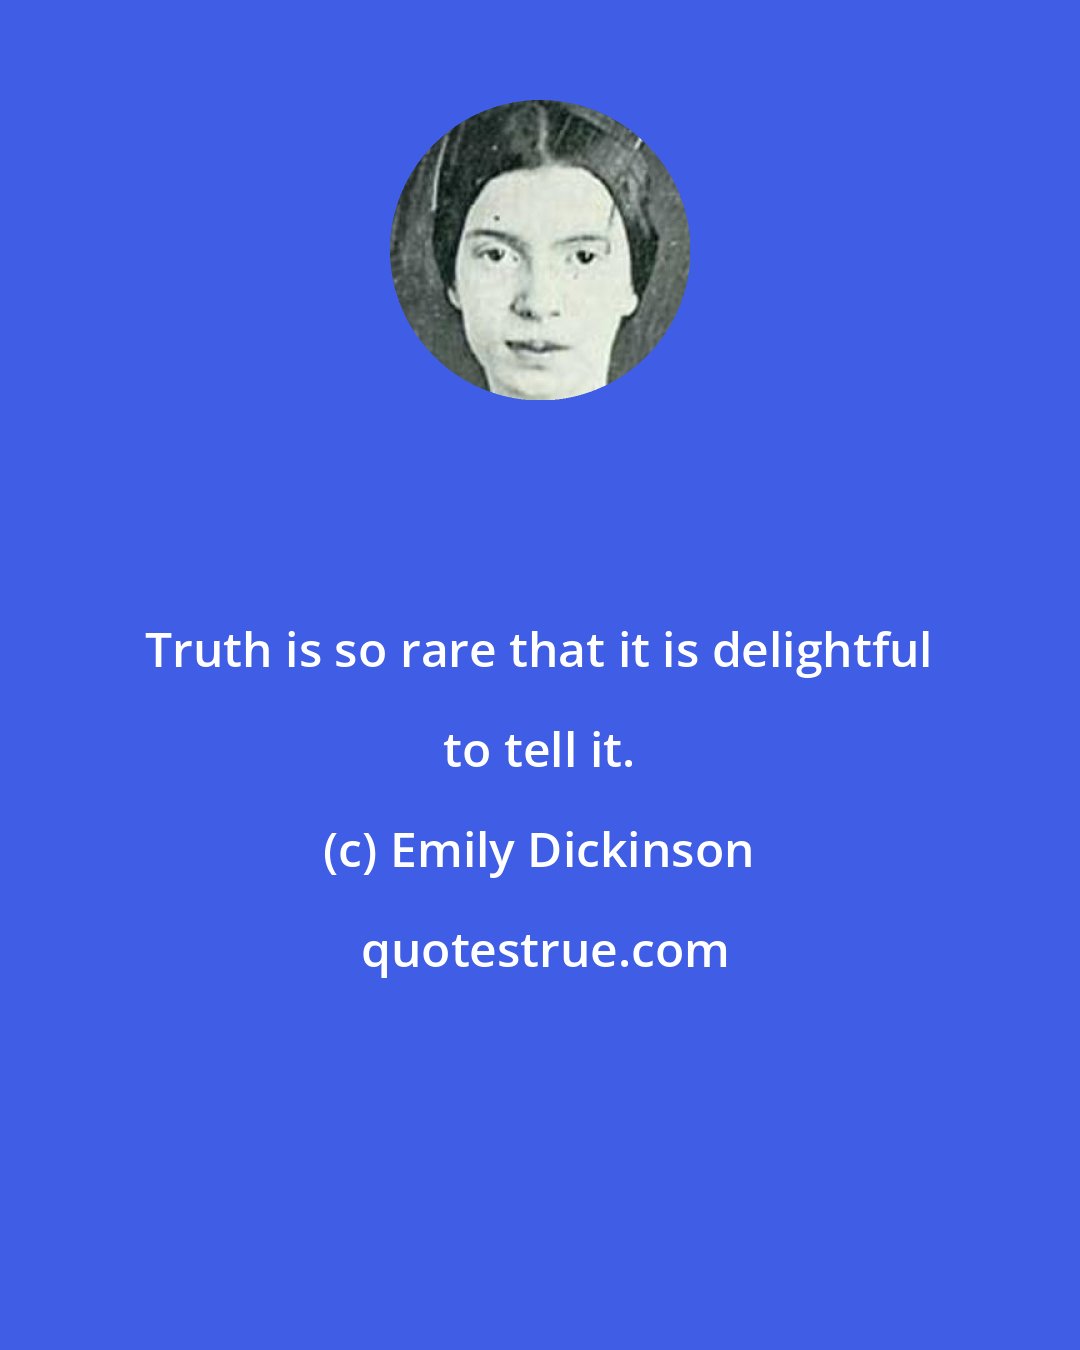 Emily Dickinson: Truth is so rare that it is delightful to tell it.